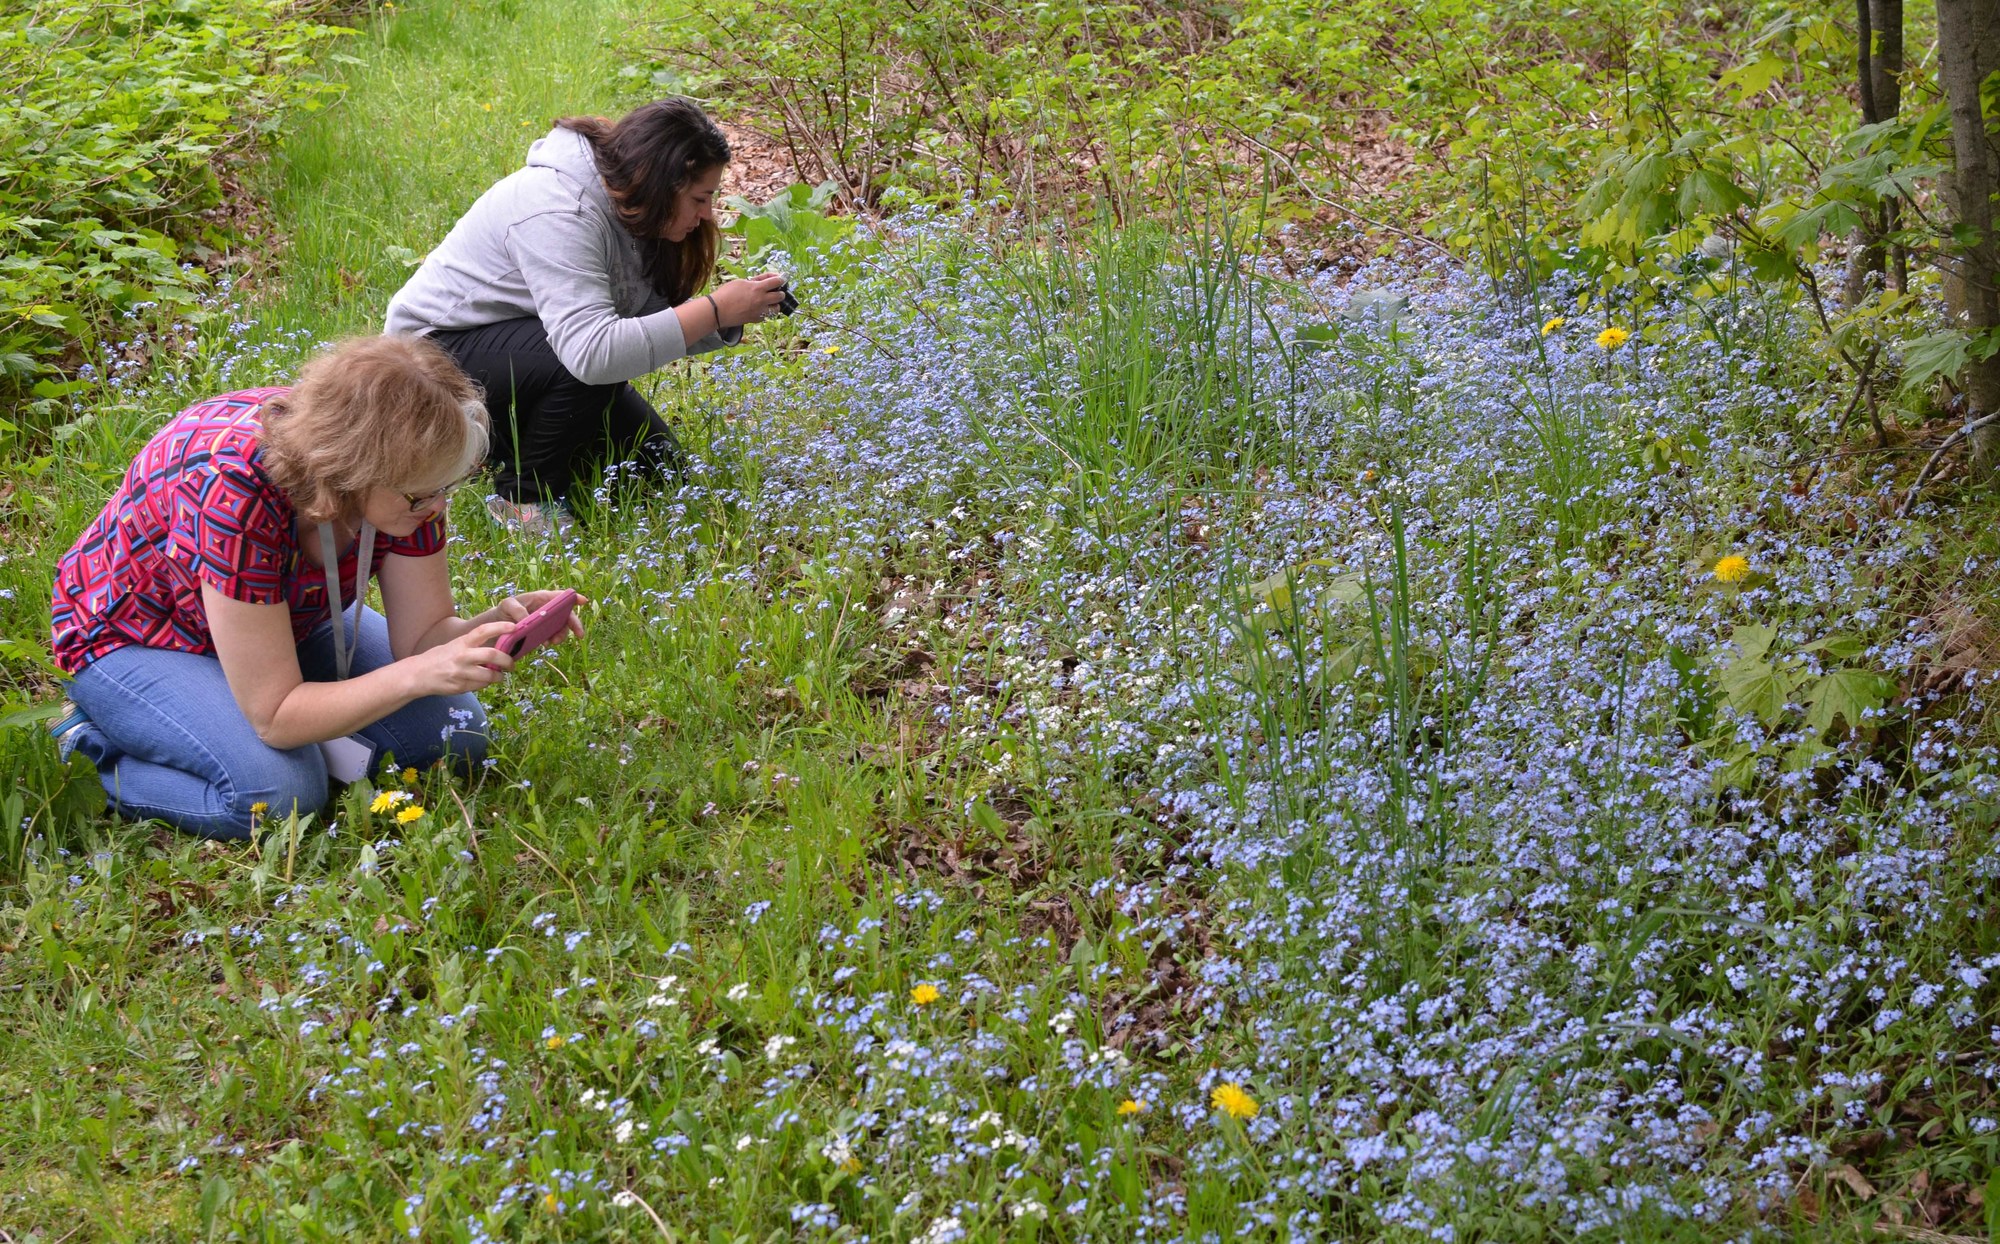 Outdoor photography students get close to some blooming forget-me-knots at the Bay Cliff Health Camp in Marquette County.